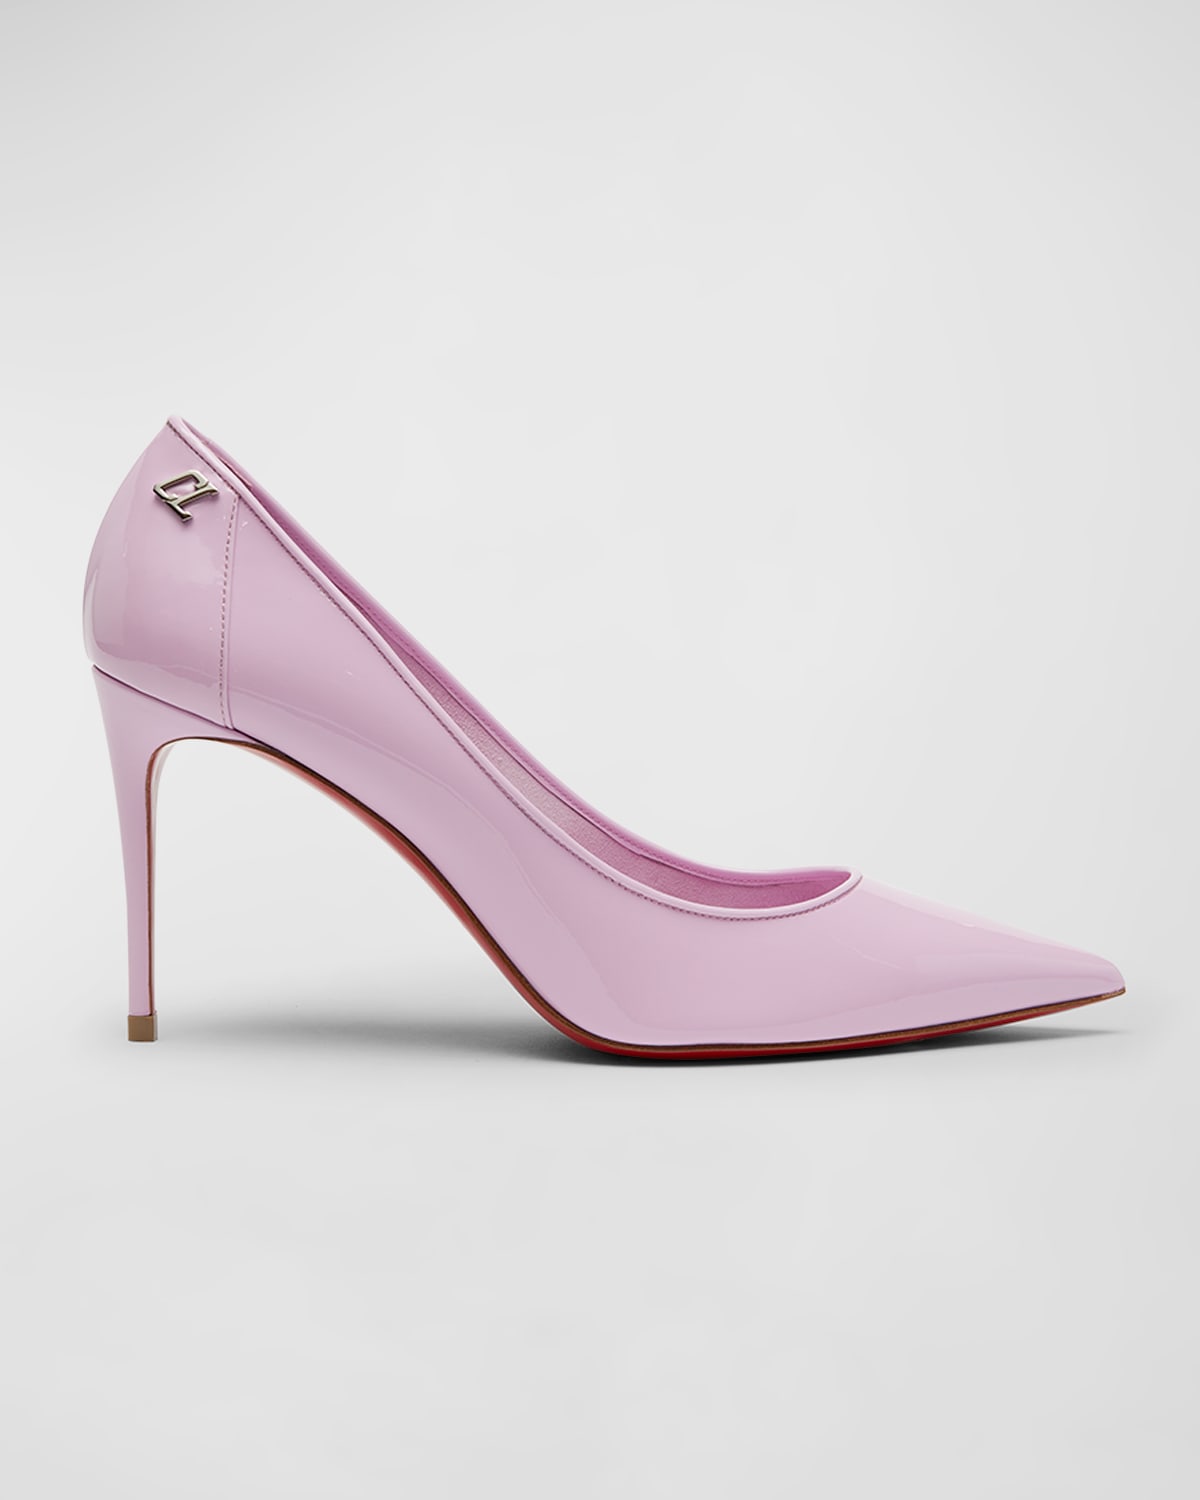 Christian Louboutin Sporty Kate 85mm Patent Soft Lining Red Sole Pumps In Pinkador